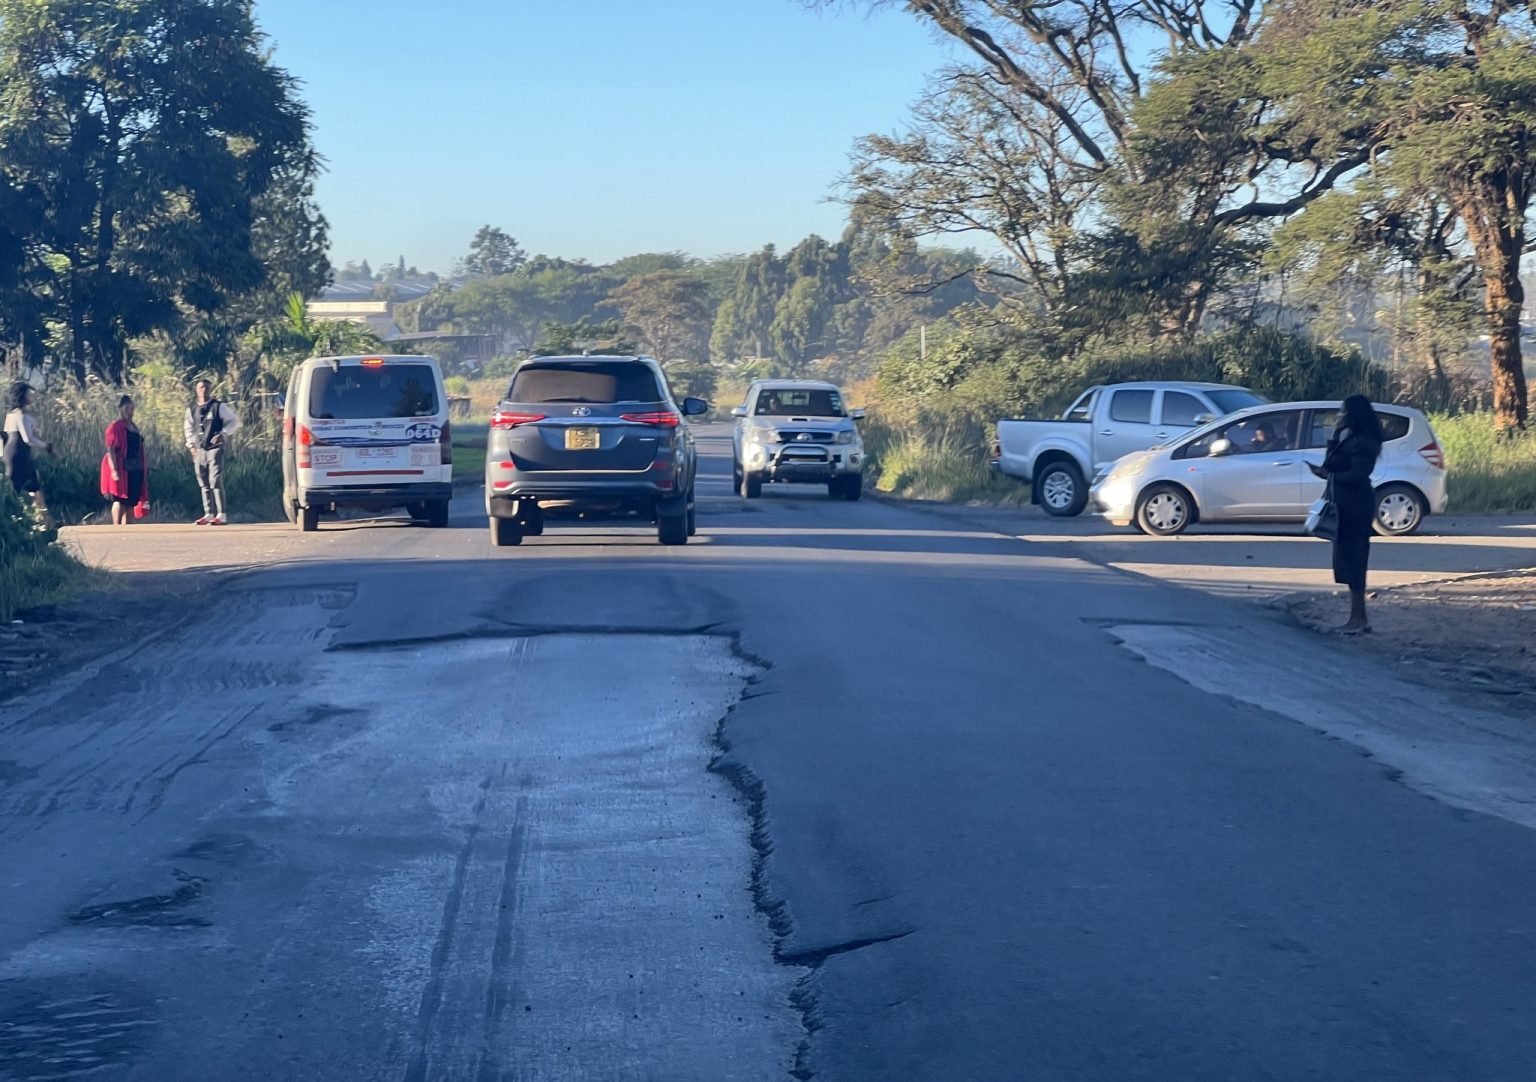 Transport Minister Felix Mhona has issued a directive for Fossil Contracting to rectify mediocre work done on the recently surfaced Lorraine Drive in Harares Bluff Hill area | Report Focus News